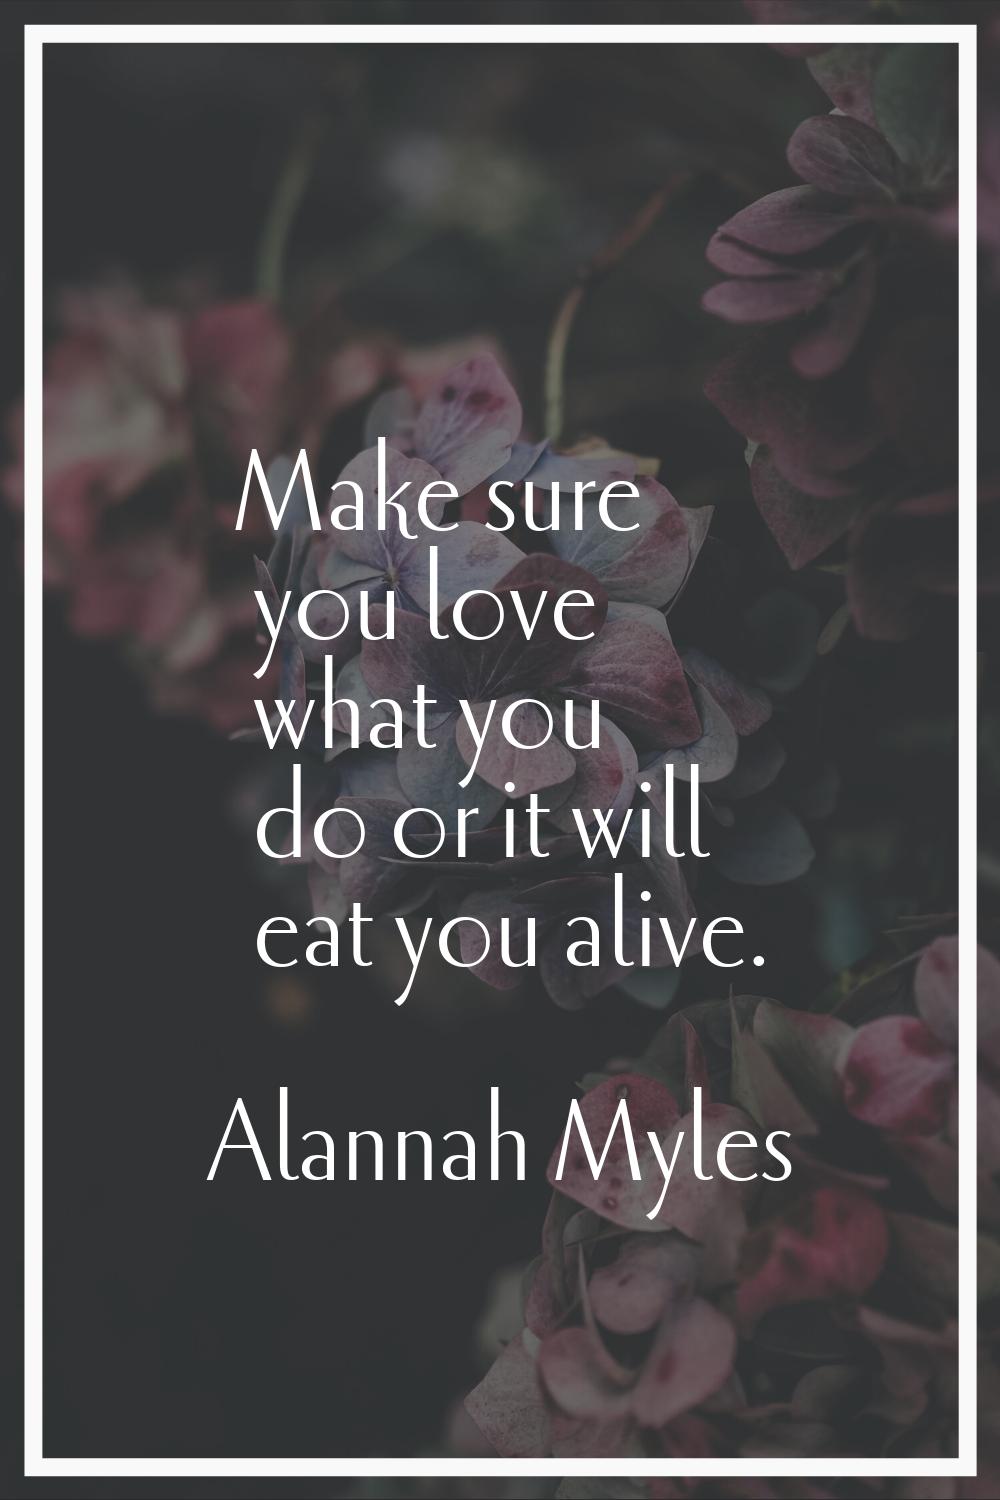 Make sure you love what you do or it will eat you alive.